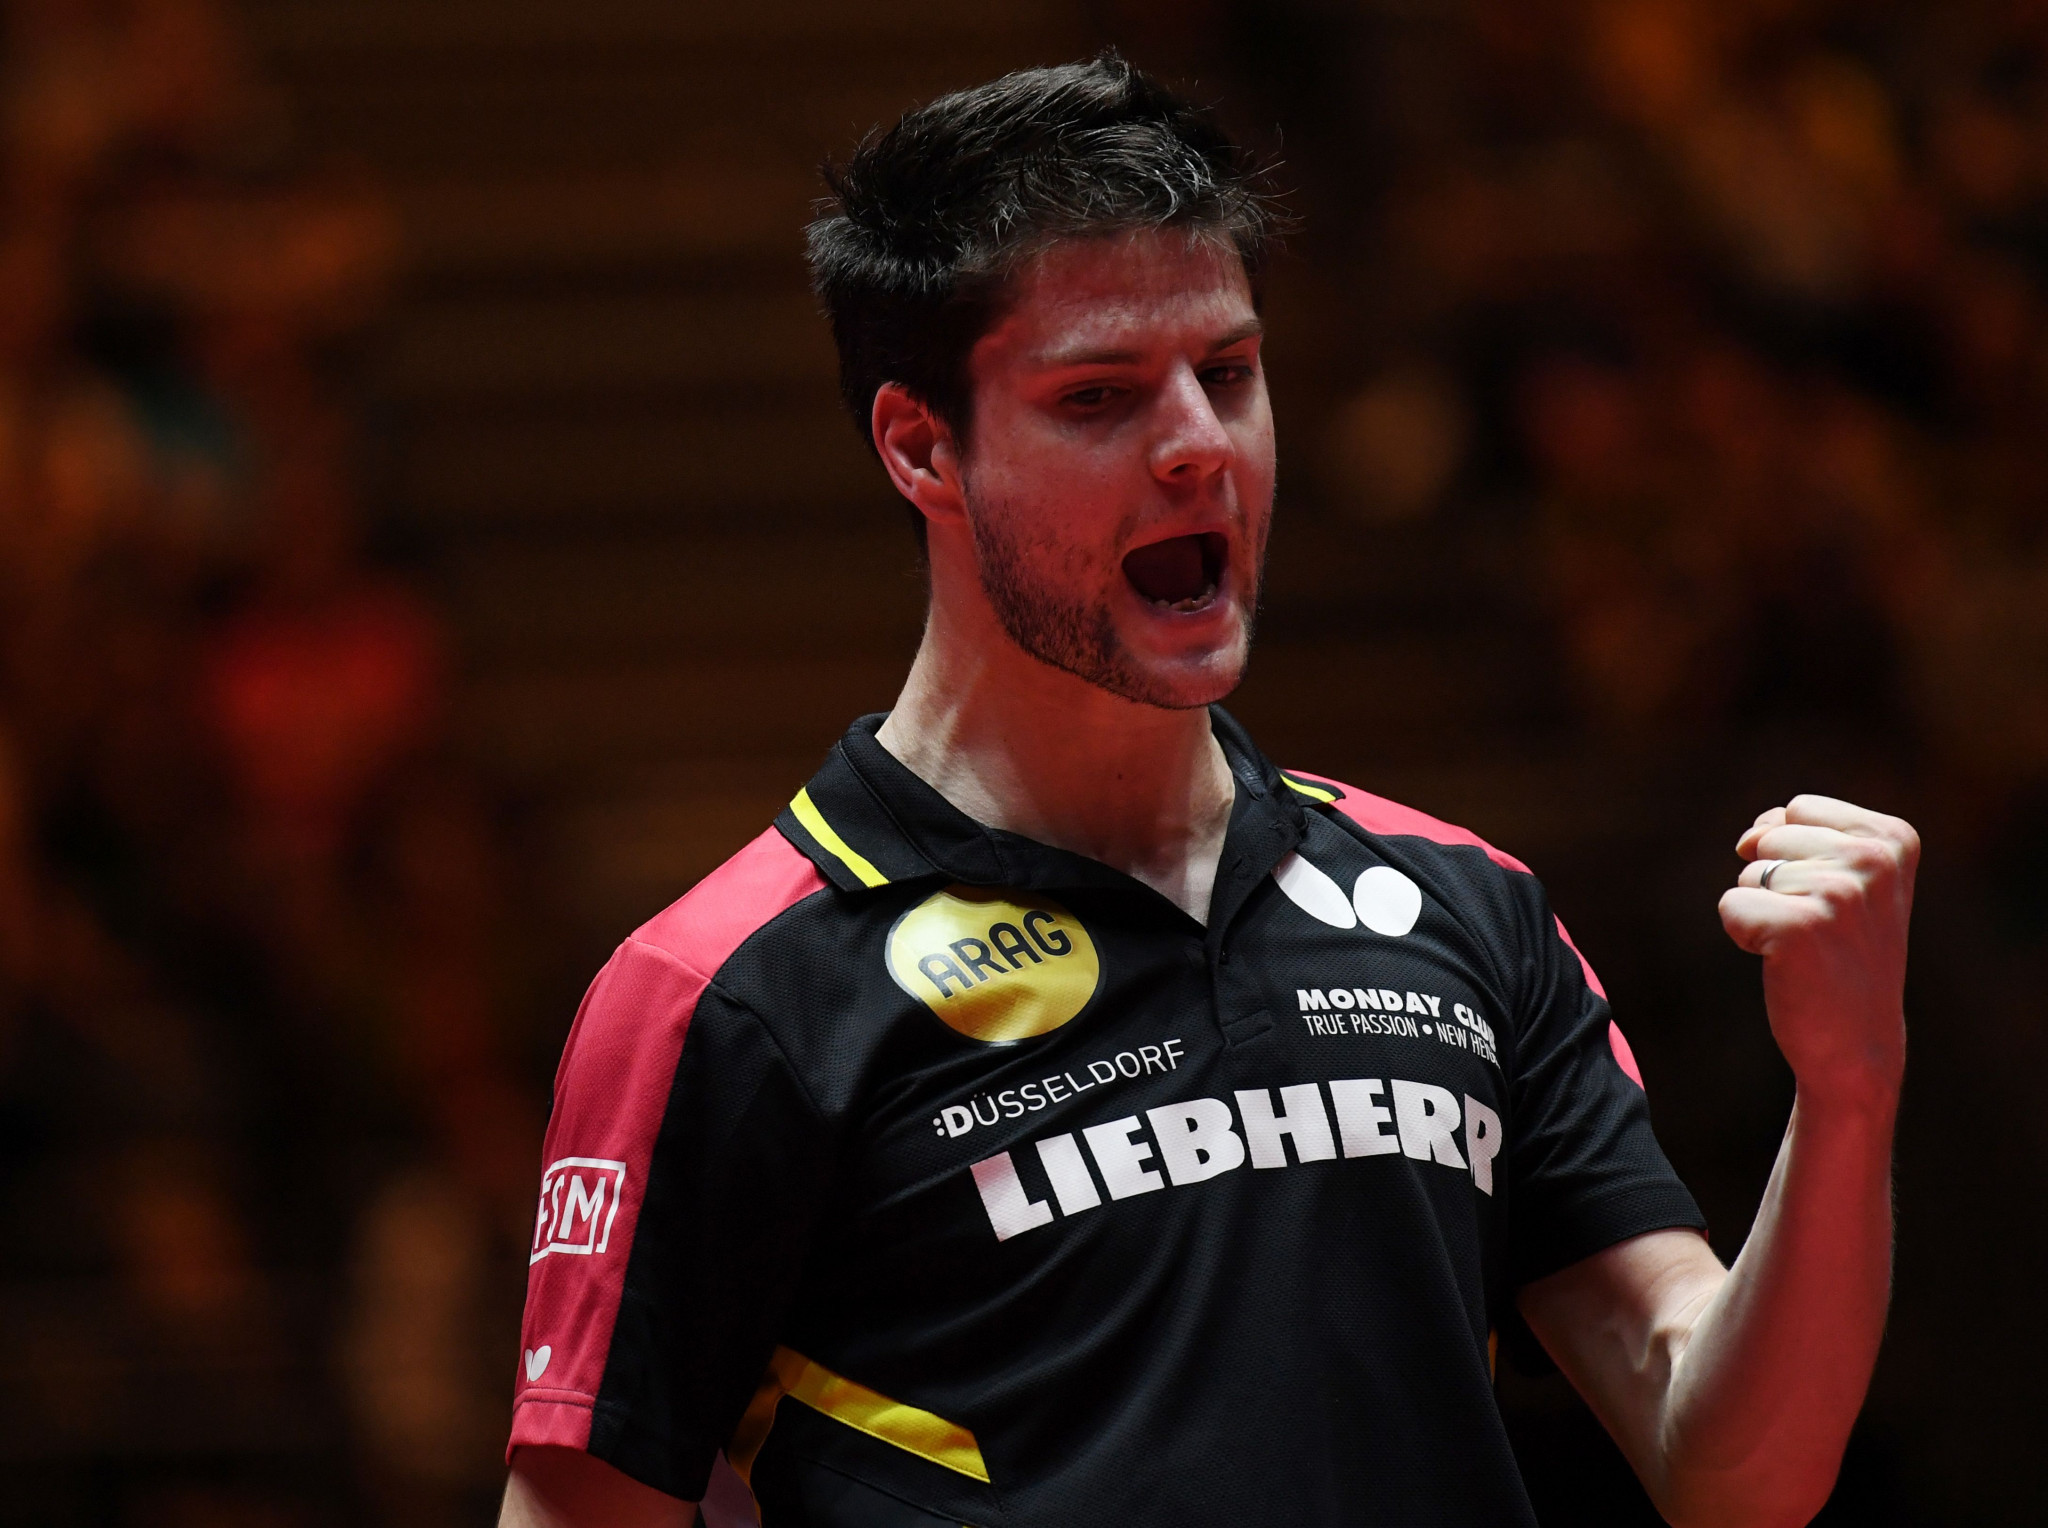 Germany tipped for both titles at ITTF European Championships